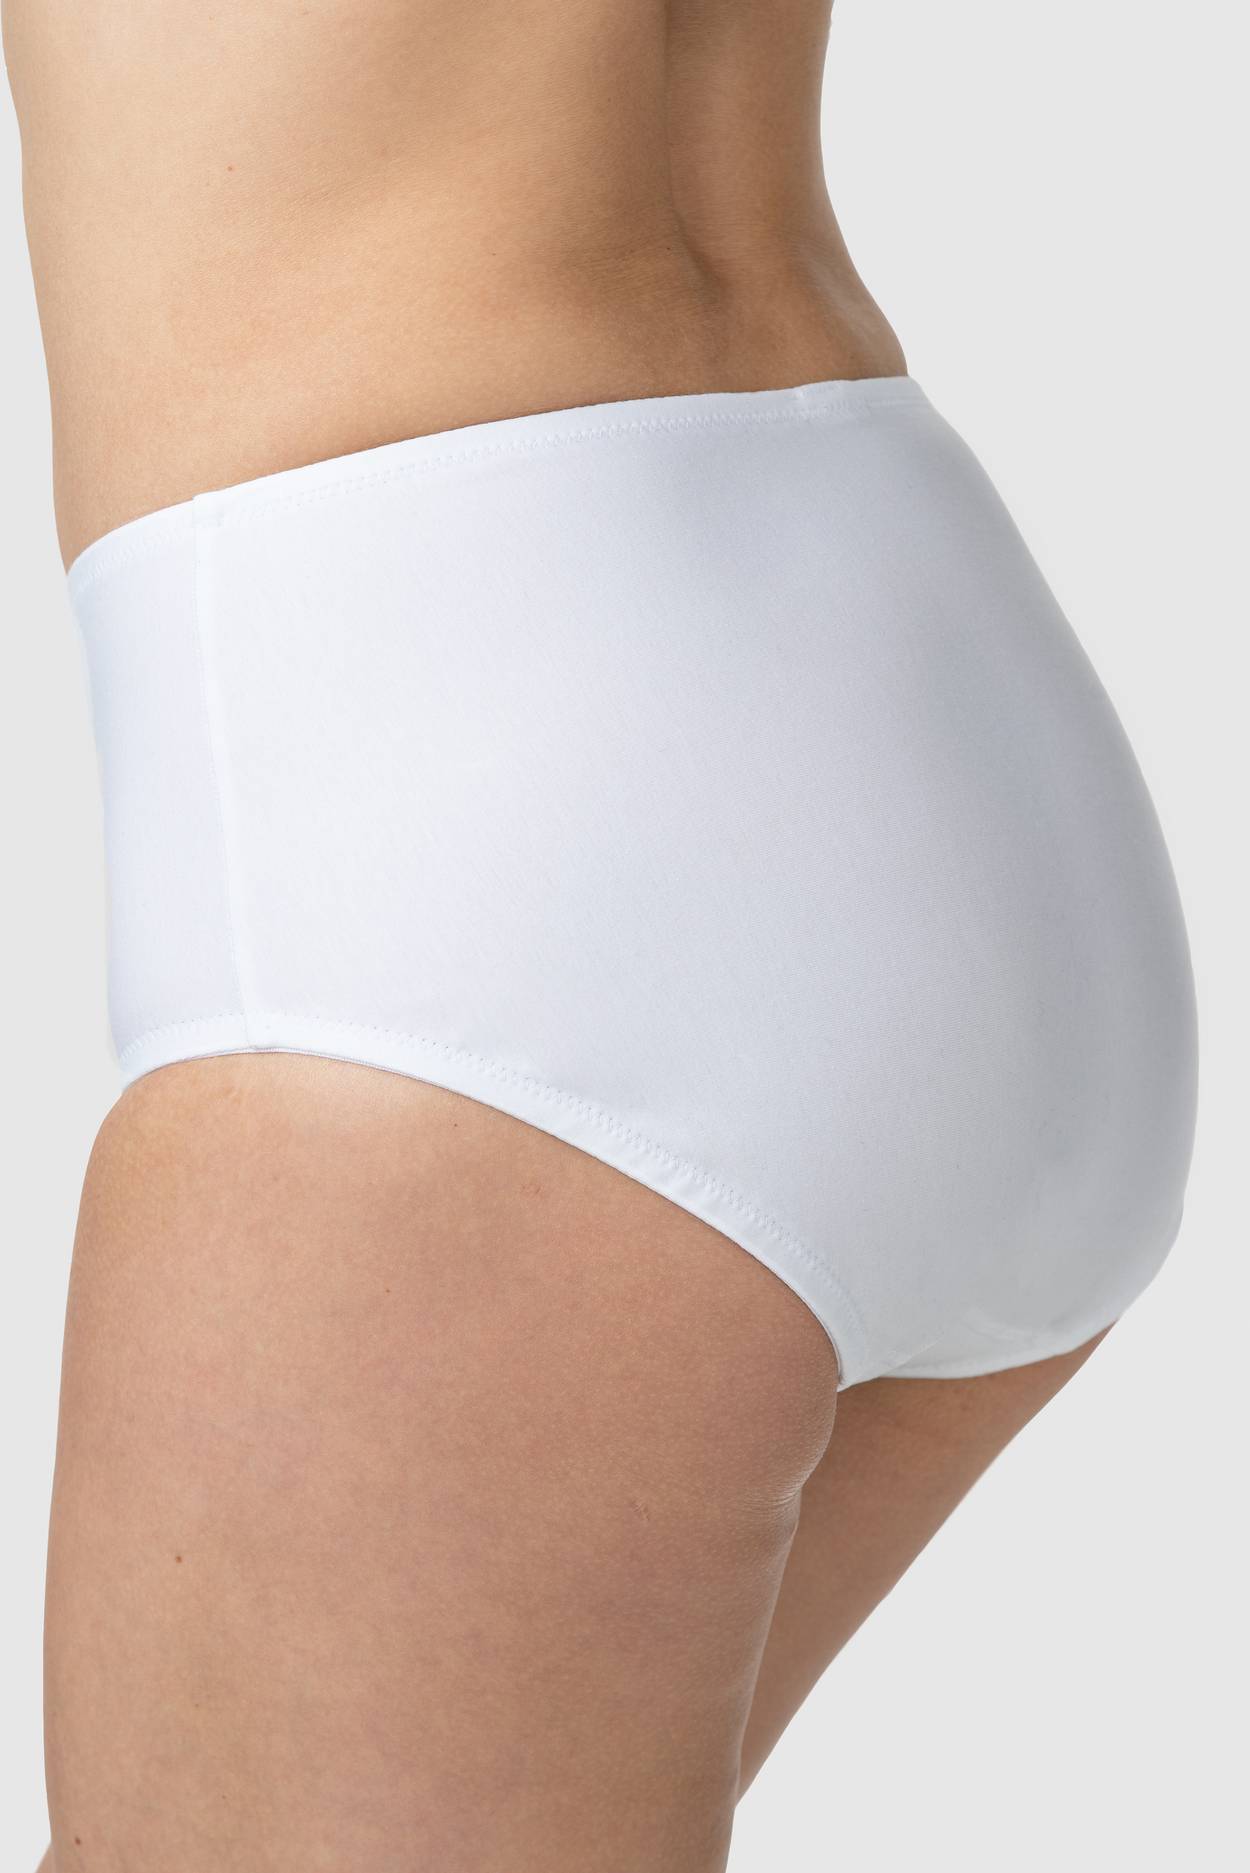 Broderie Anglaise panty